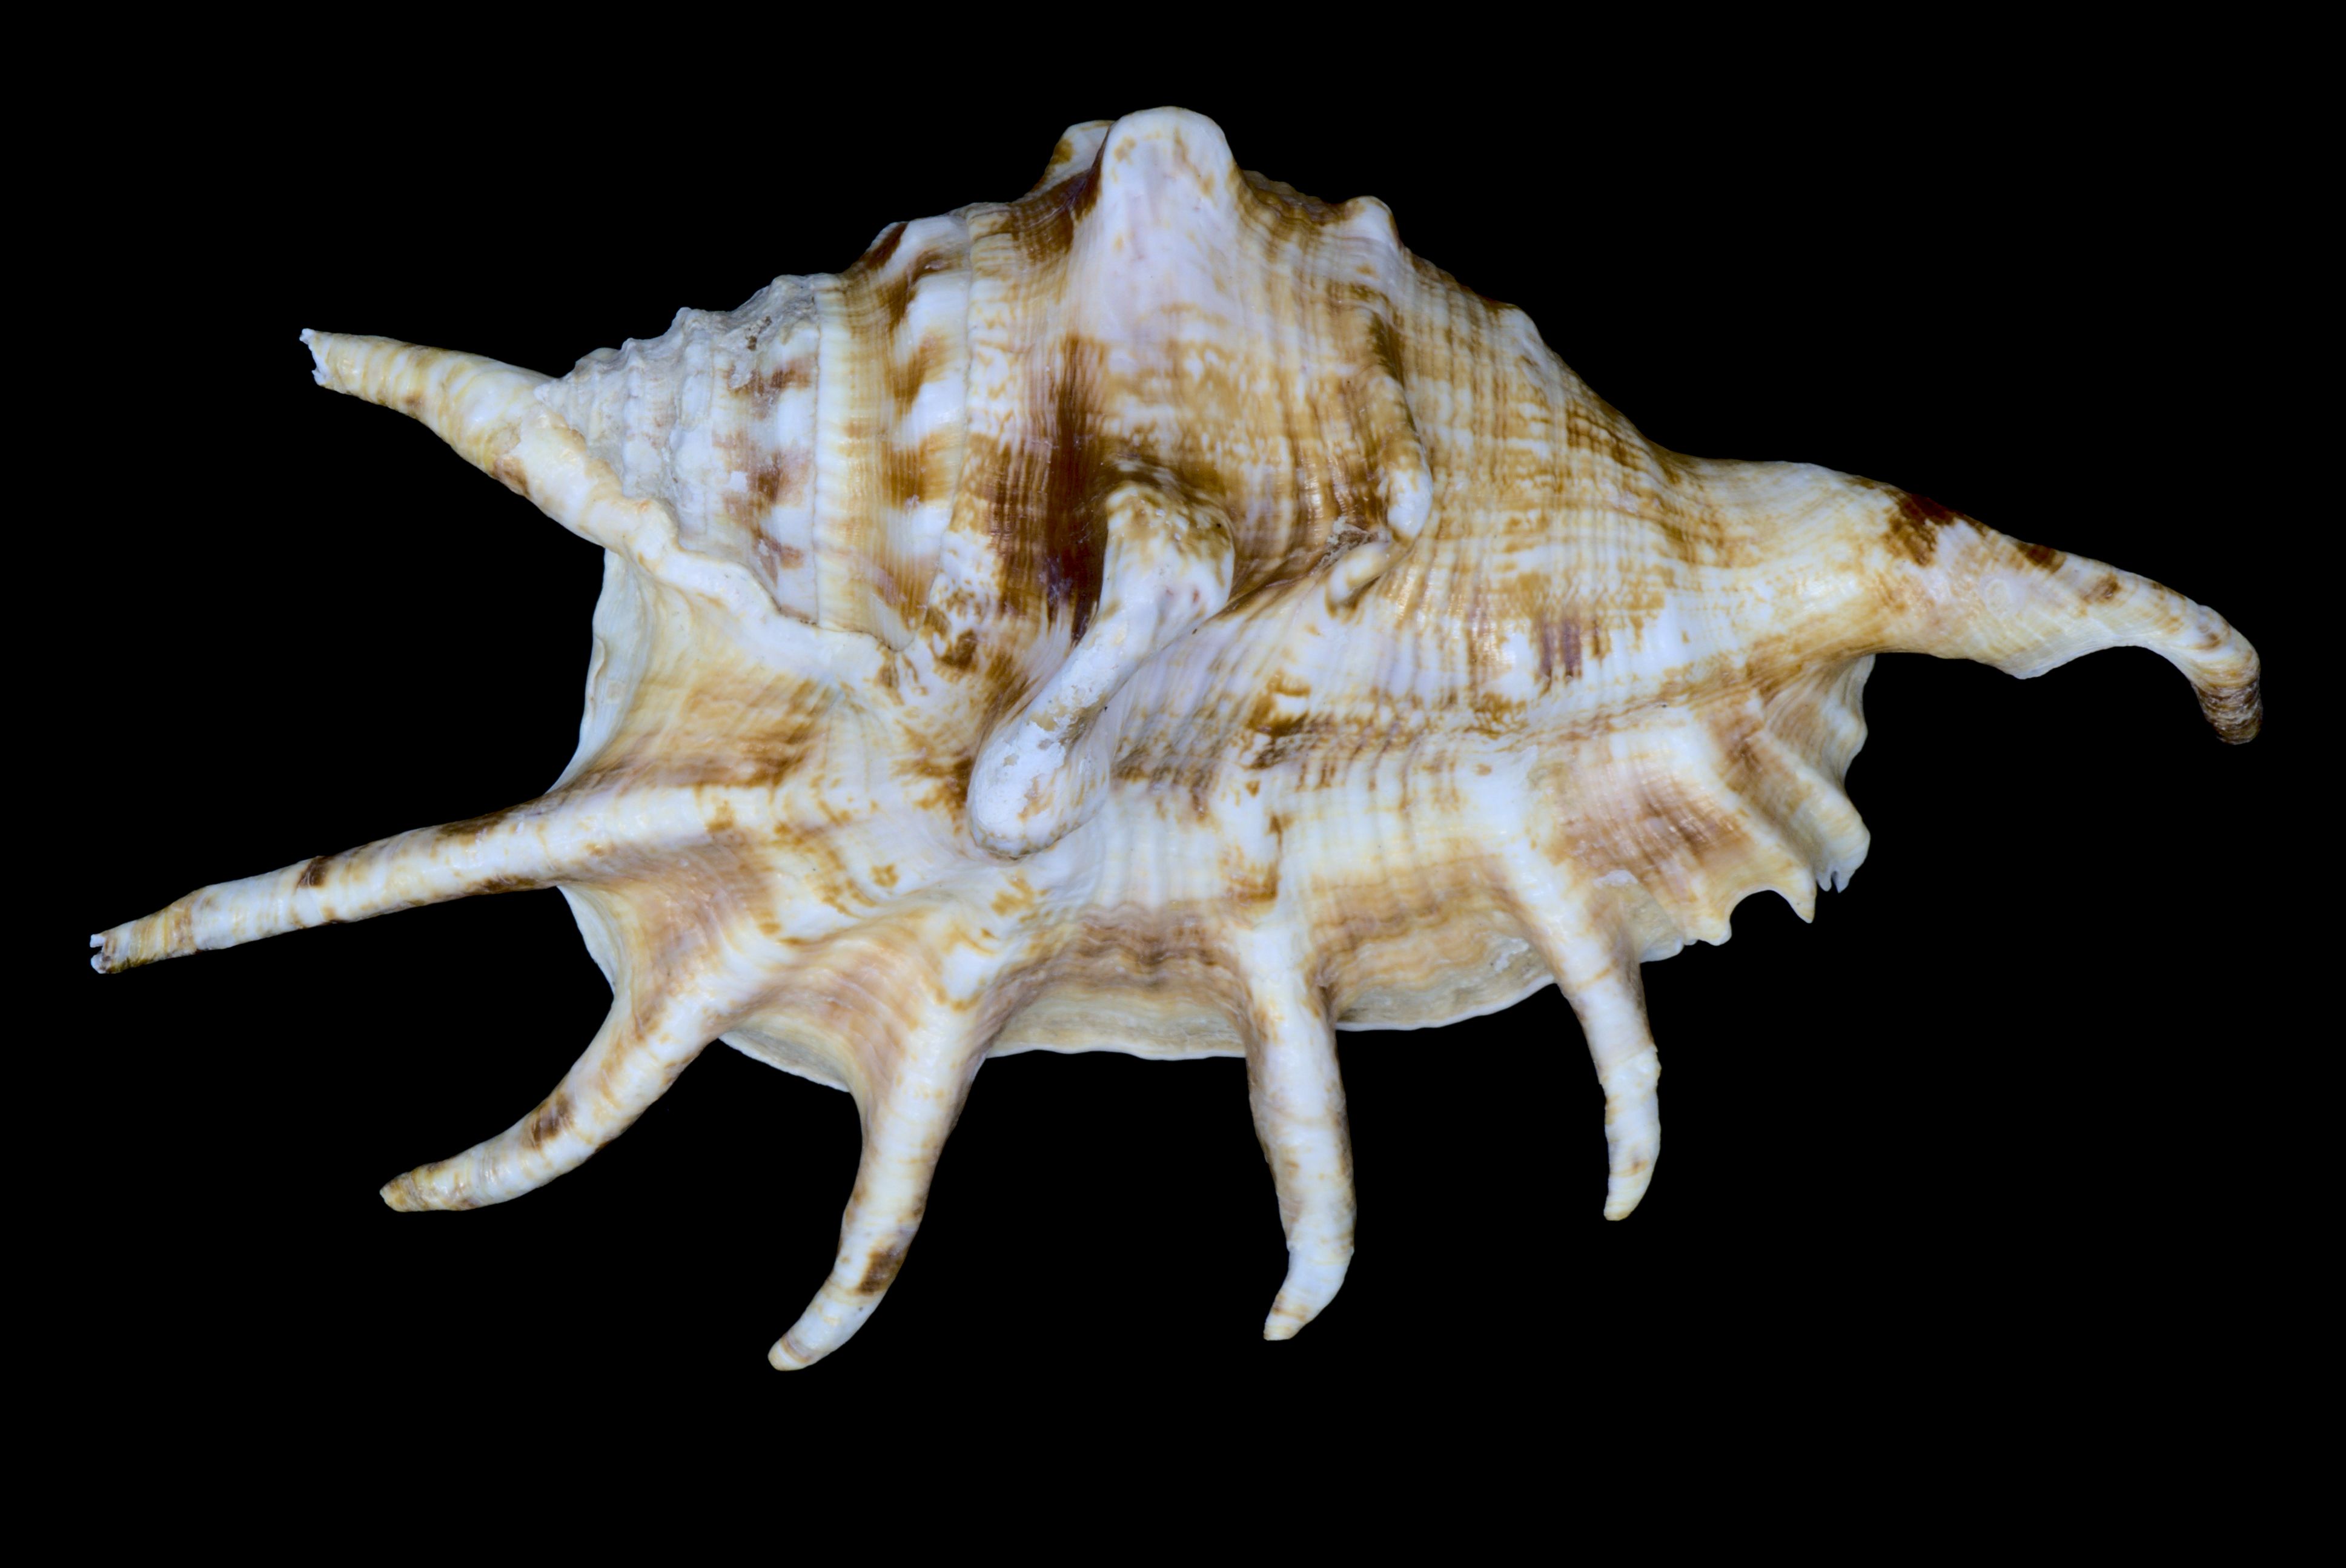 Lambis lambis spider conch, white with tan speckles and six spiny "legs"